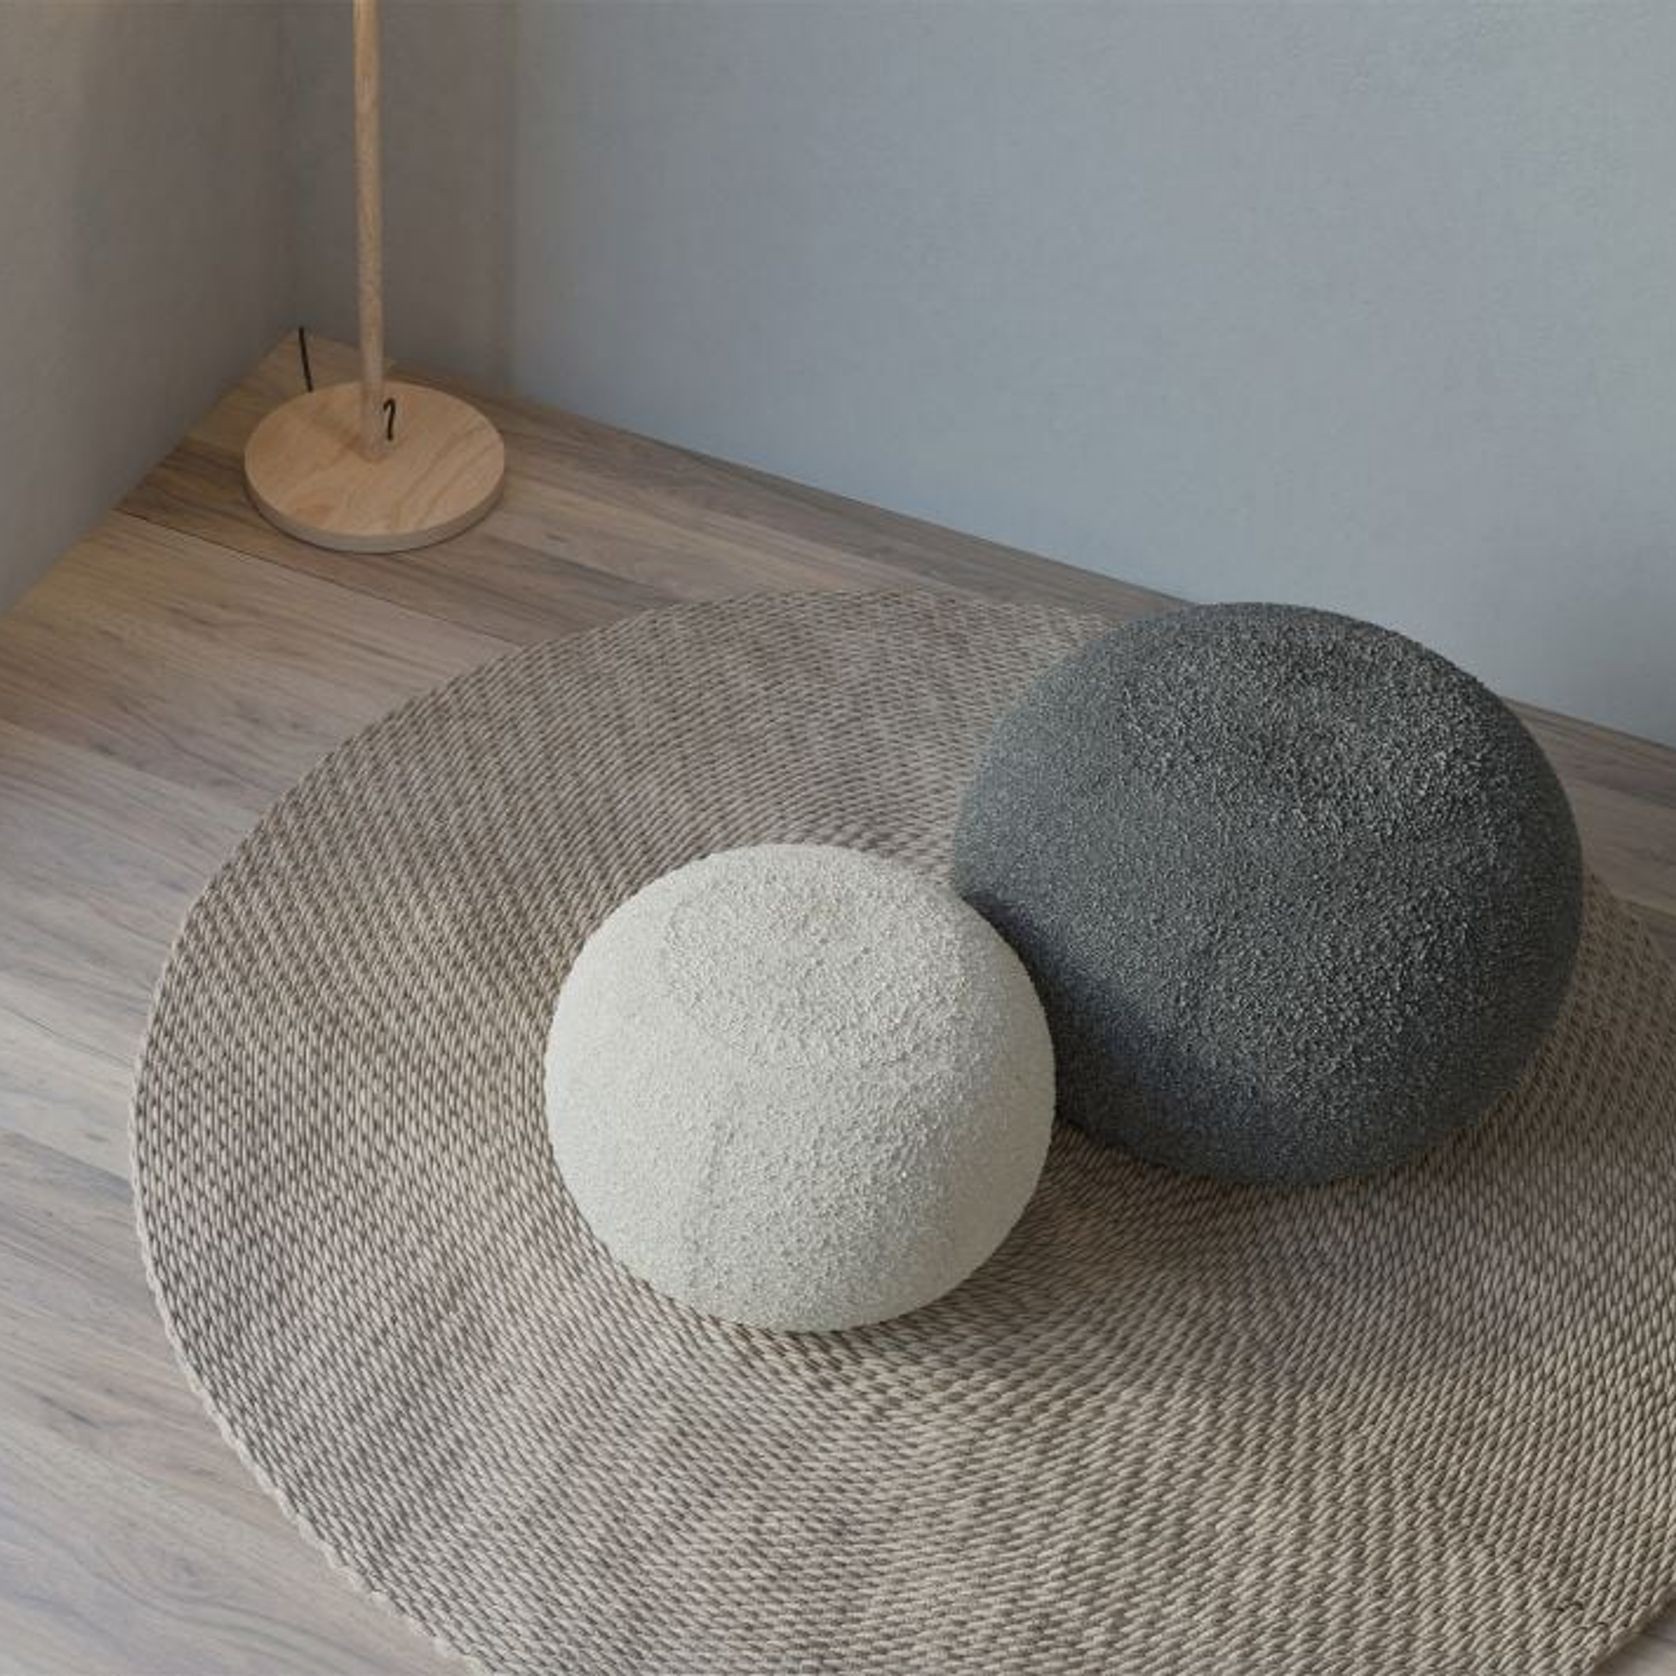 Ronde Pouf in Stone Boucle - Small gallery detail image